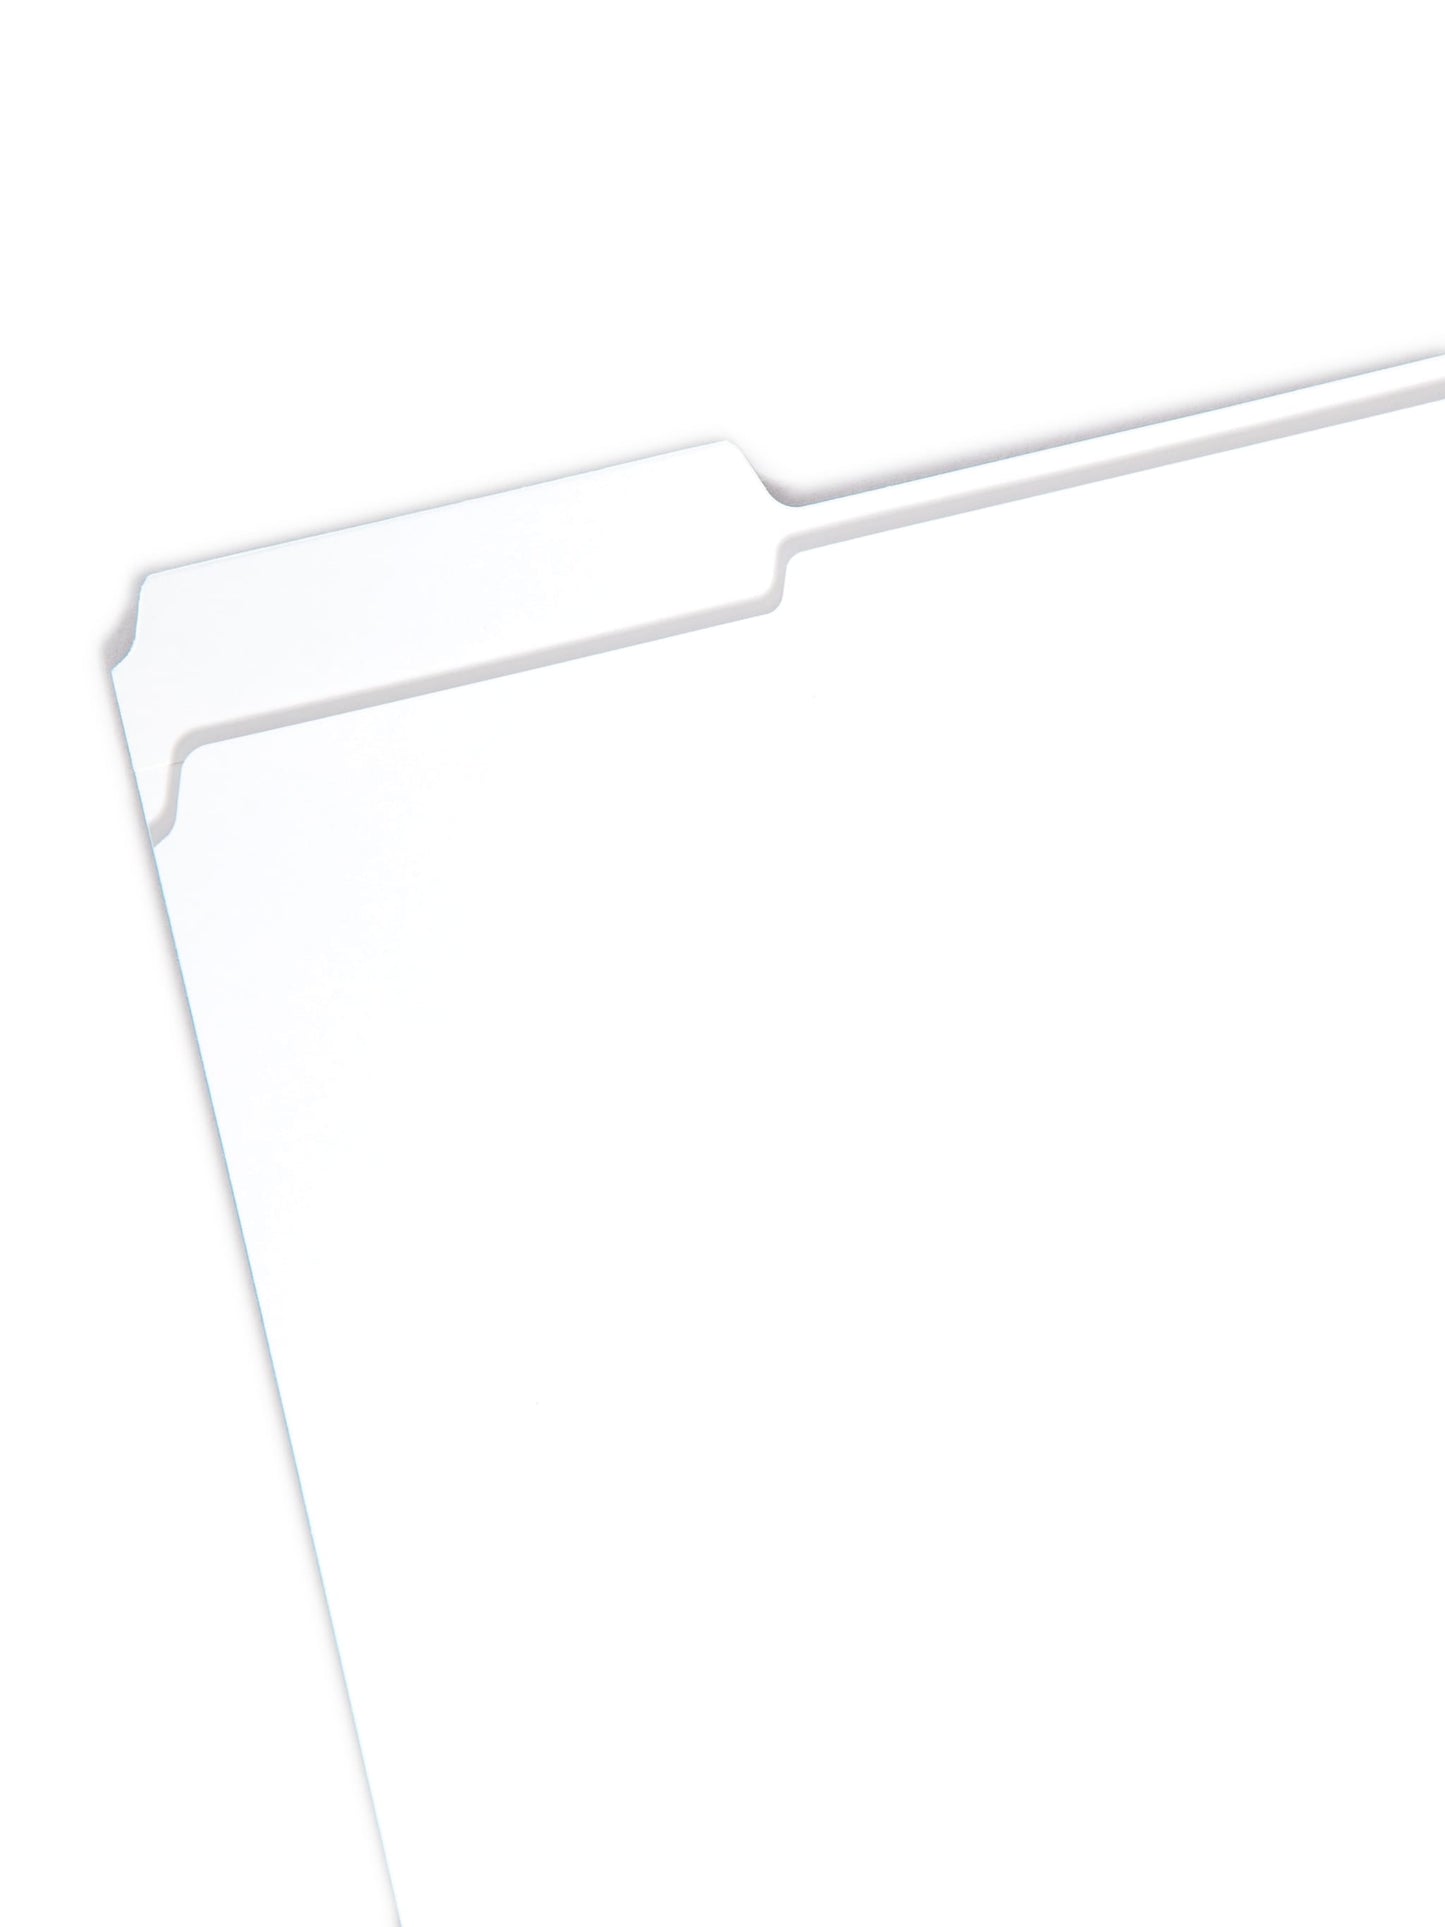 Reinforced Tab File Folders, 1/3-Cut Tab, White Color, Letter Size, Set of 100, 086486128346